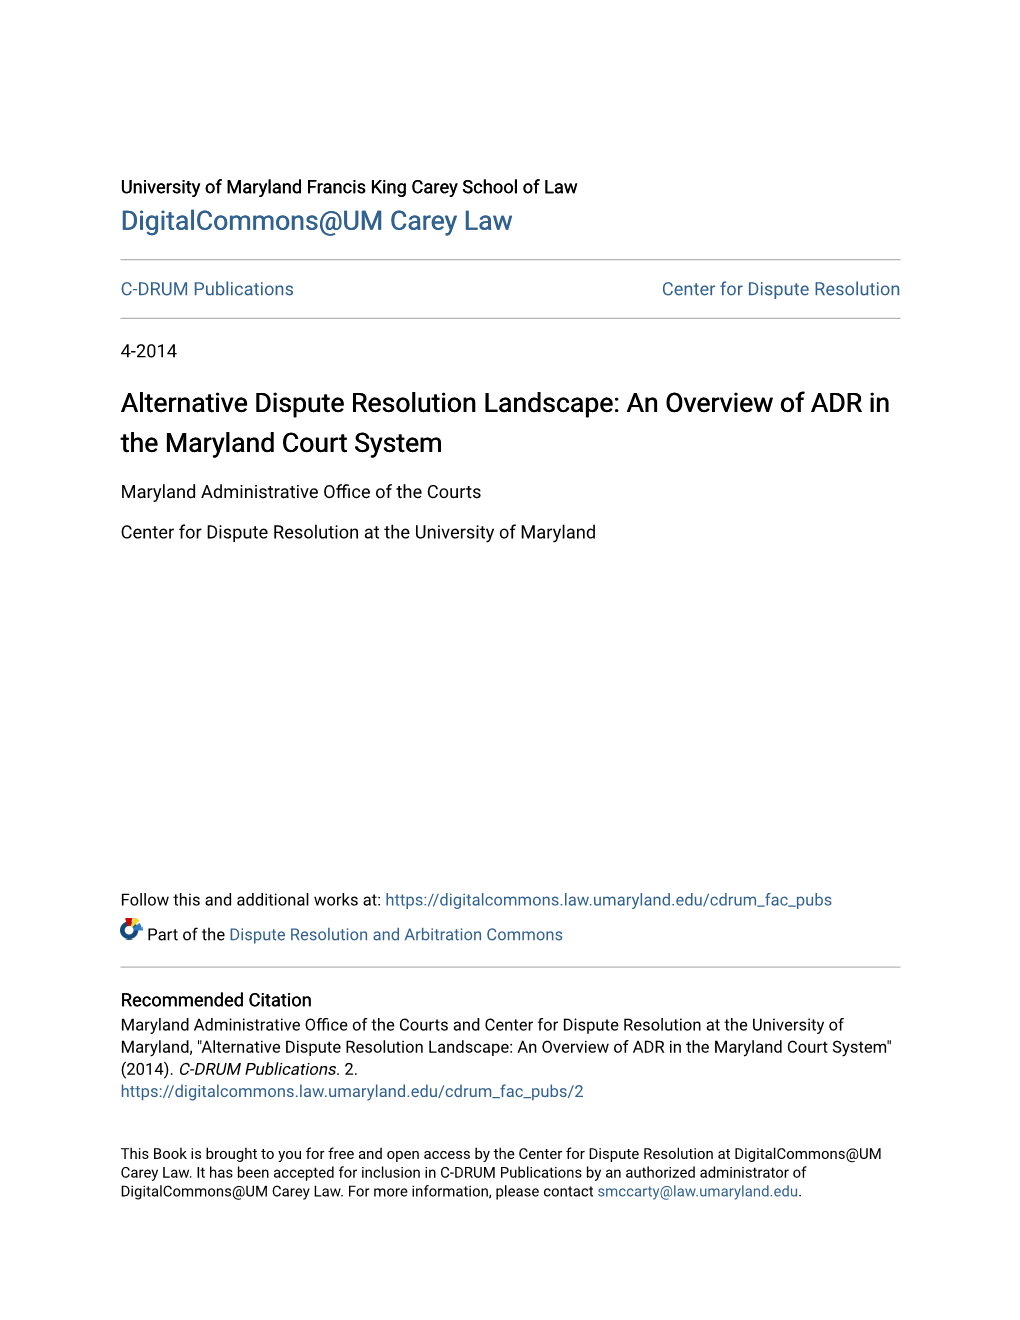 Alternative Dispute Resolution Landscape: an Overview of ADR in the Maryland Court System